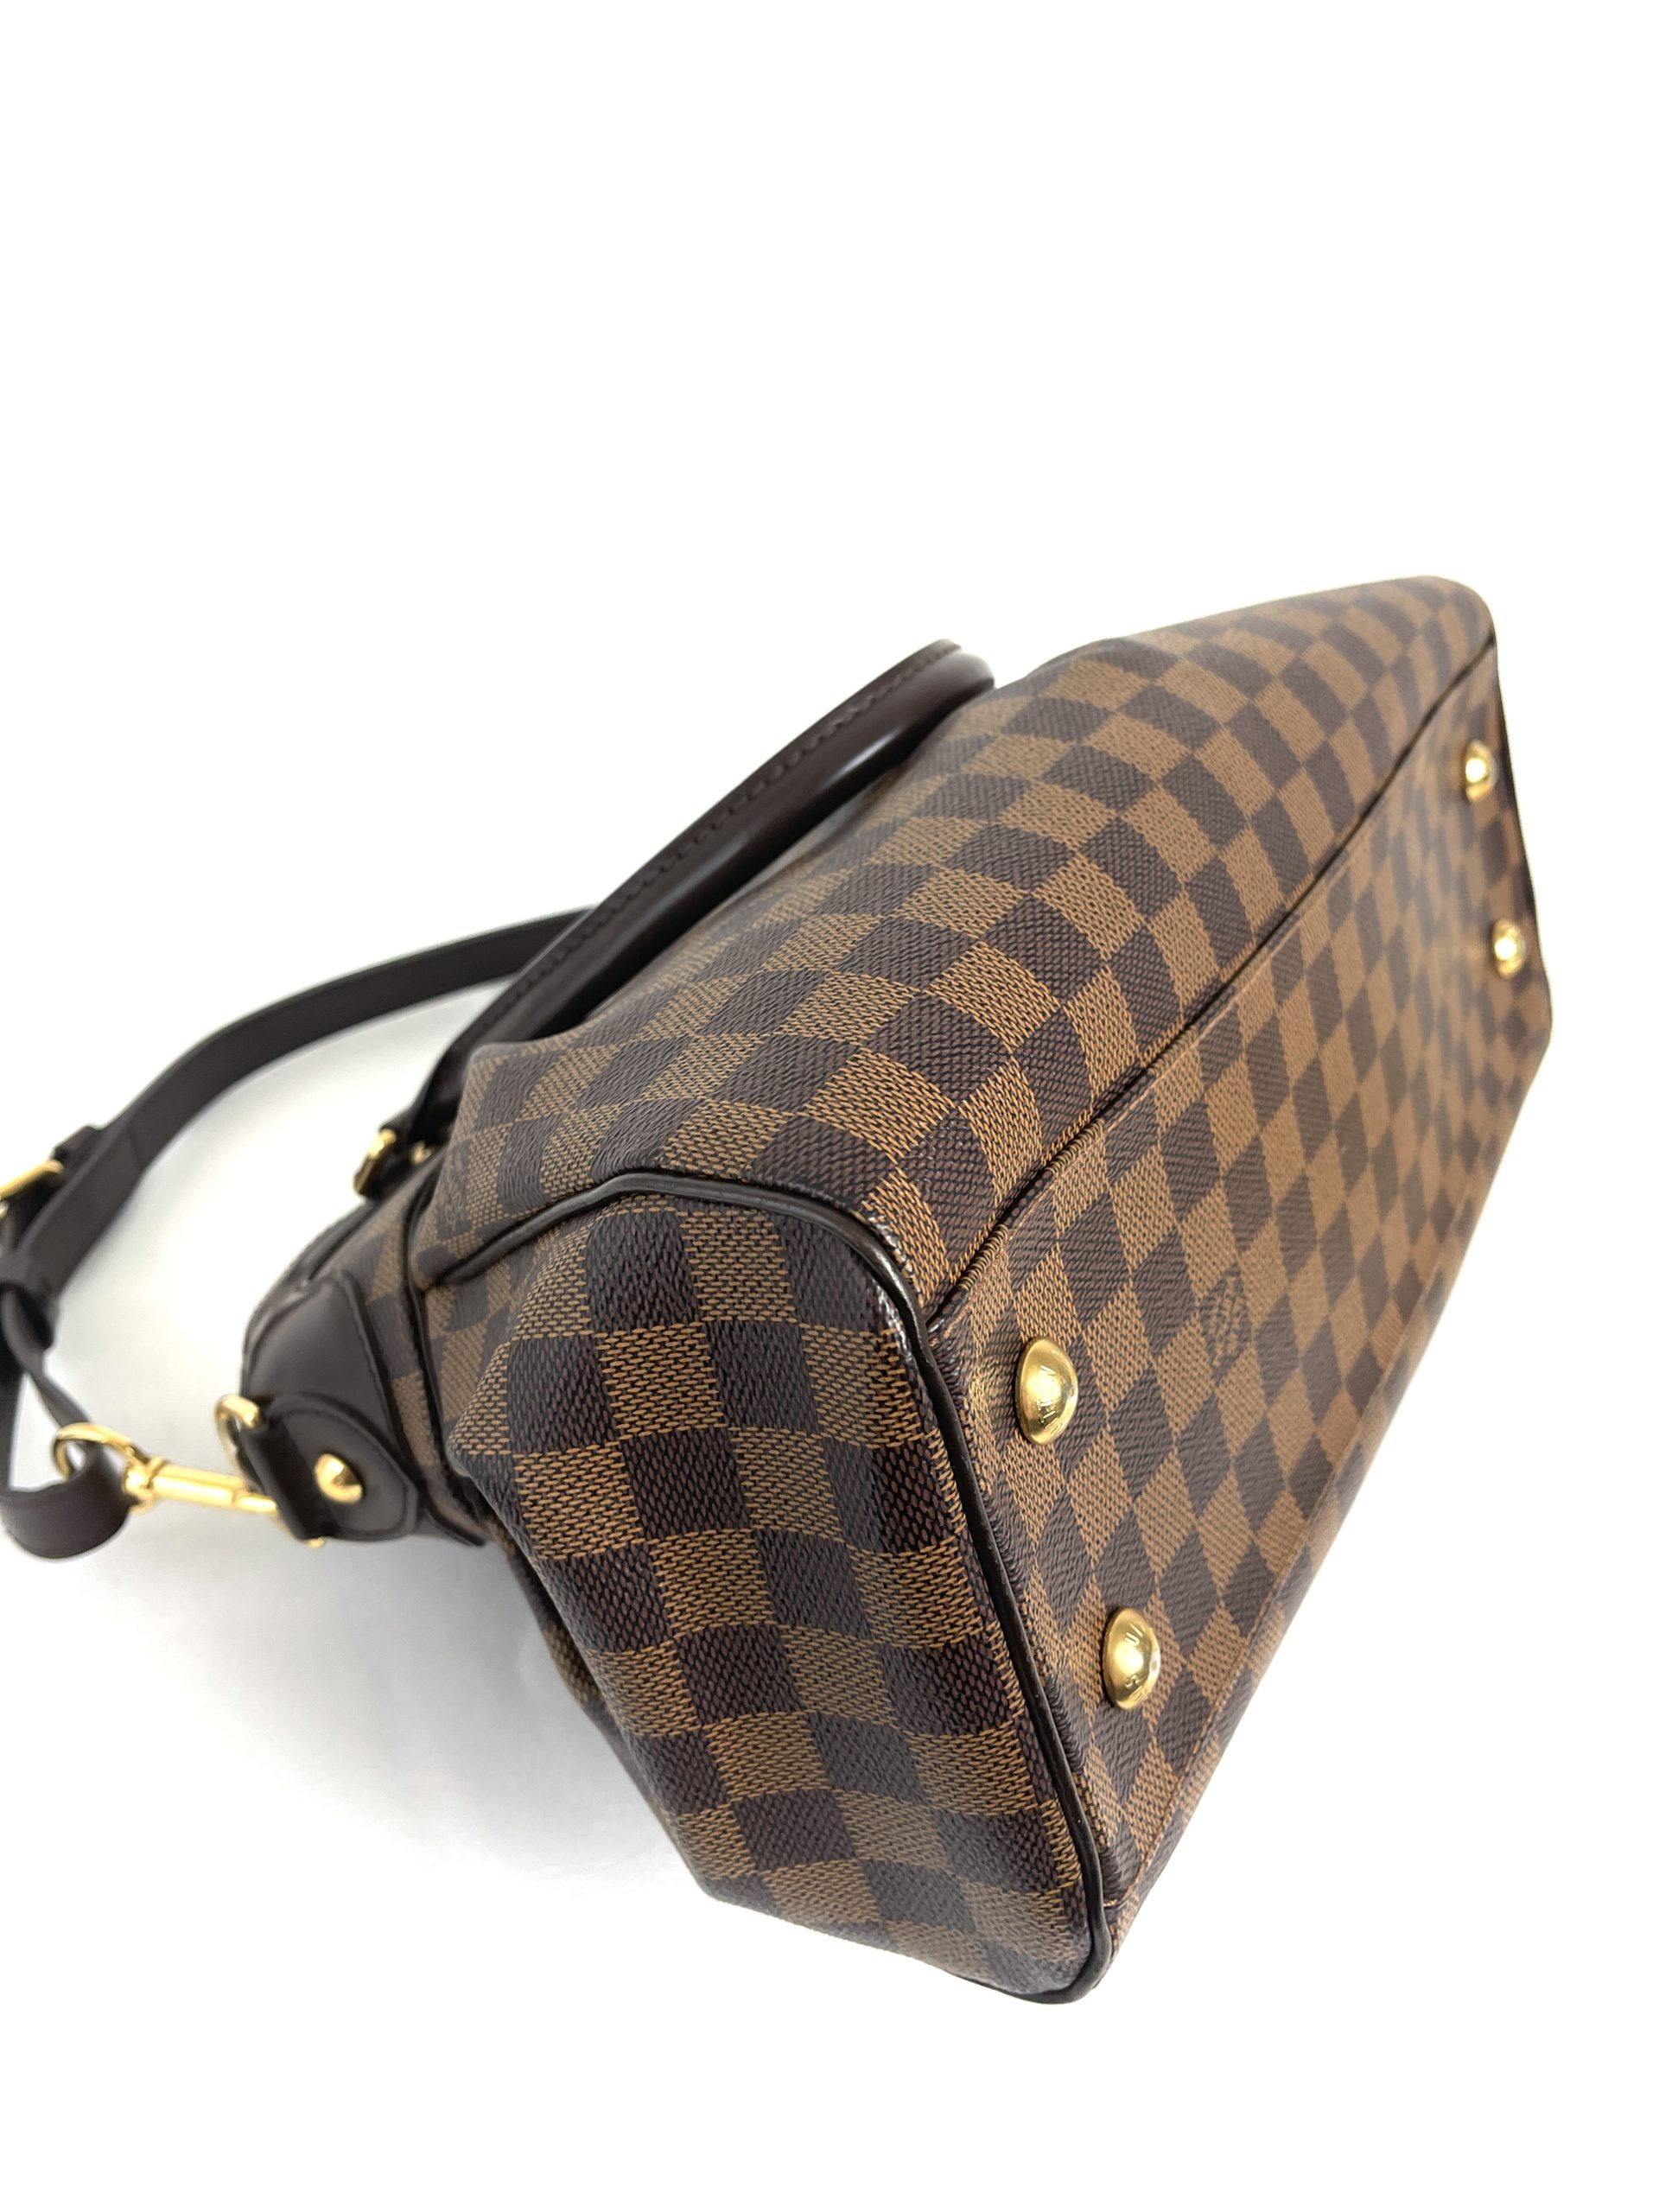 LOUIS VUITTON Trevi PM in Damier - More Than You Can Imagine